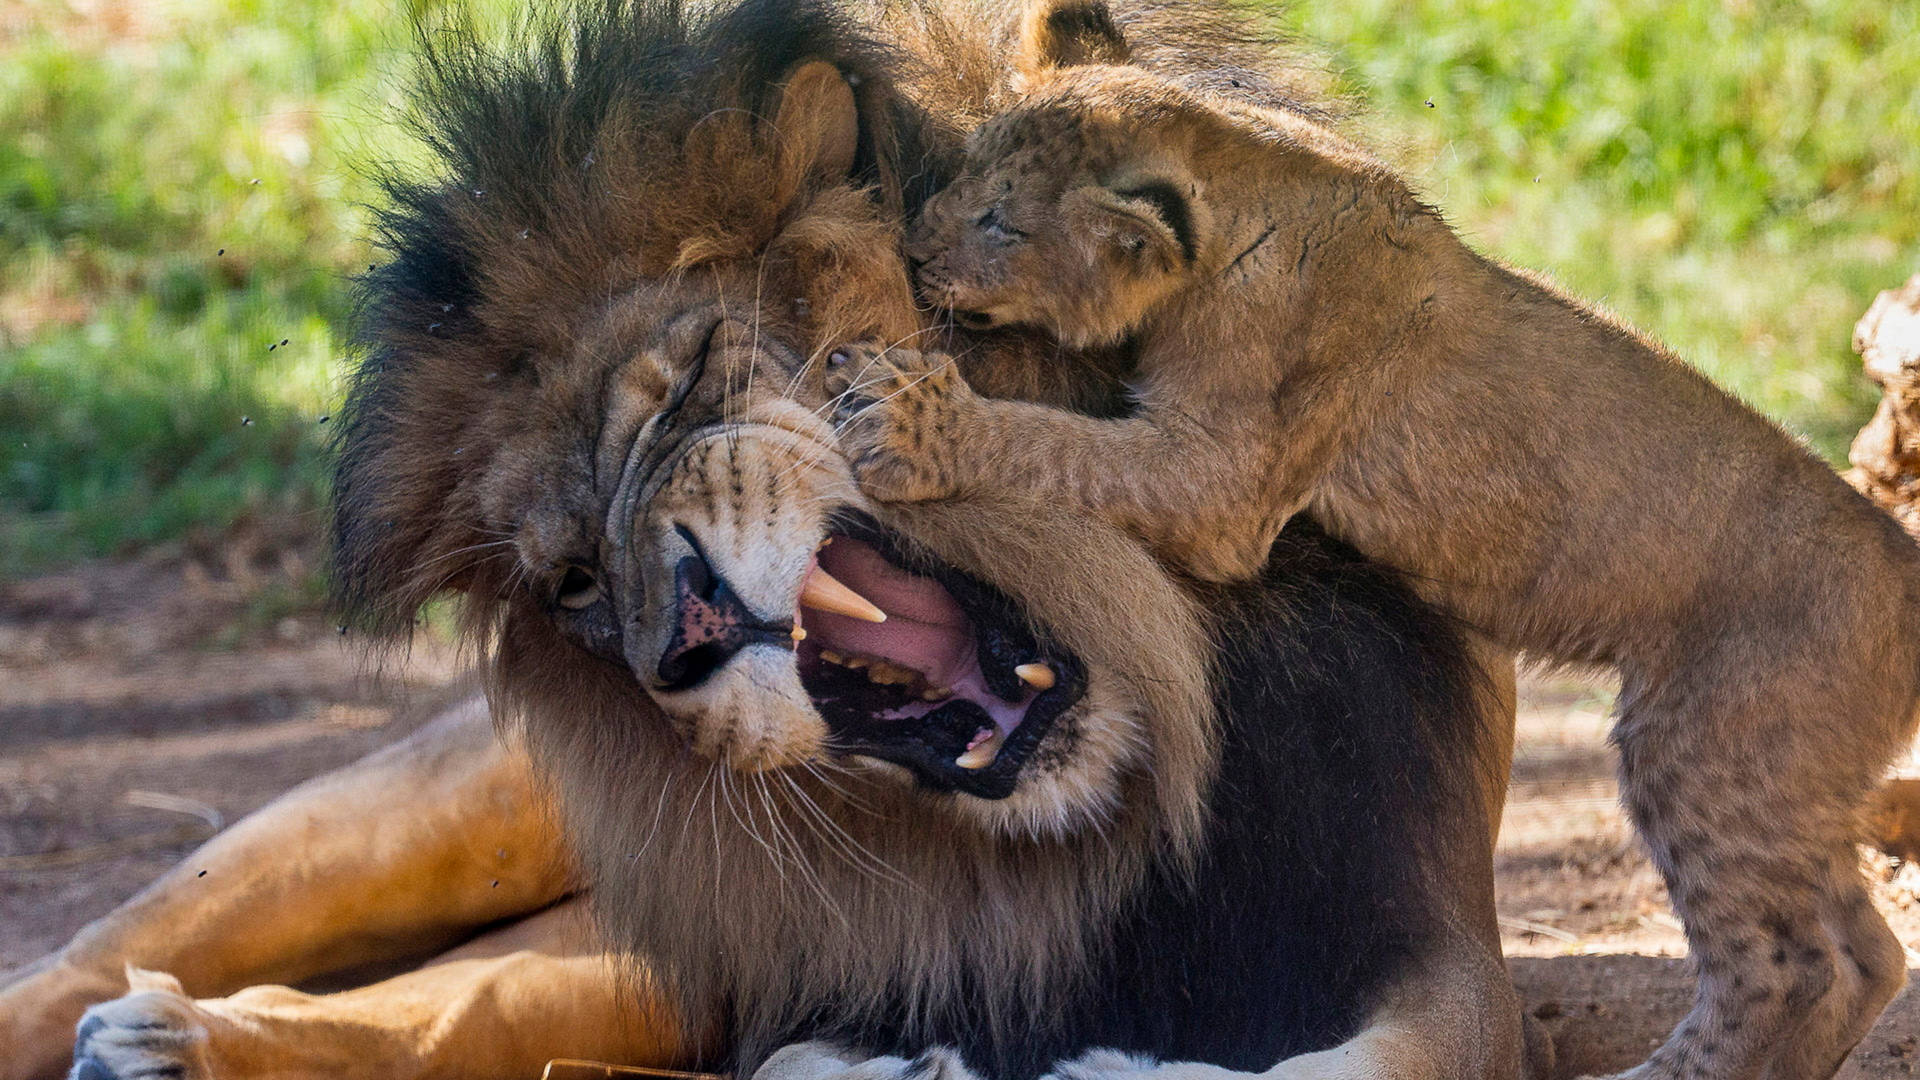 Playfully Angry Lion And Cub Wallpaper